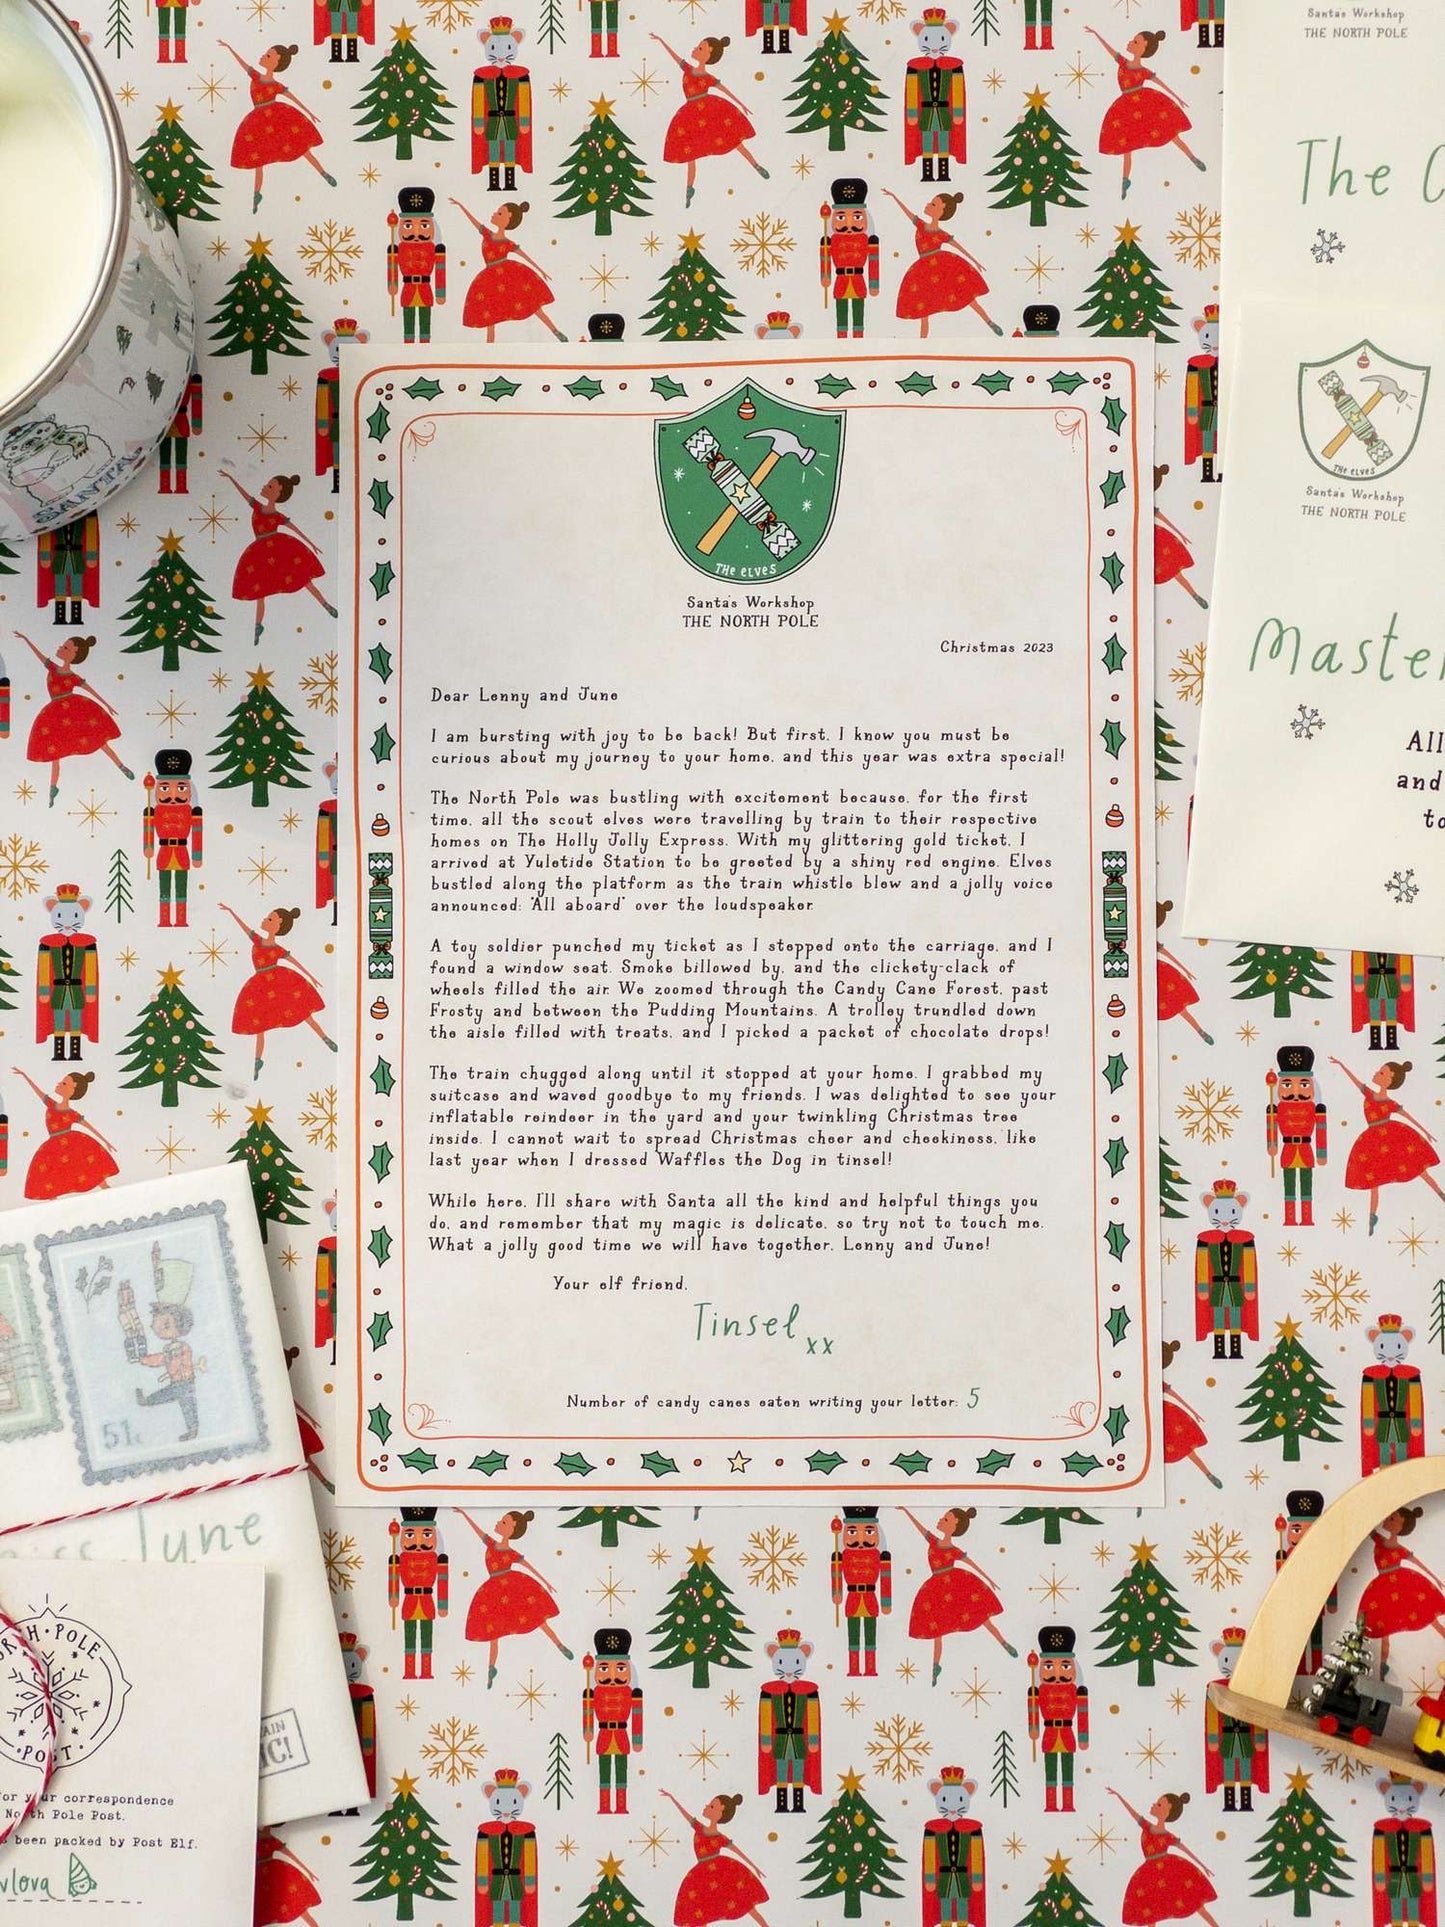 The Elf Letter